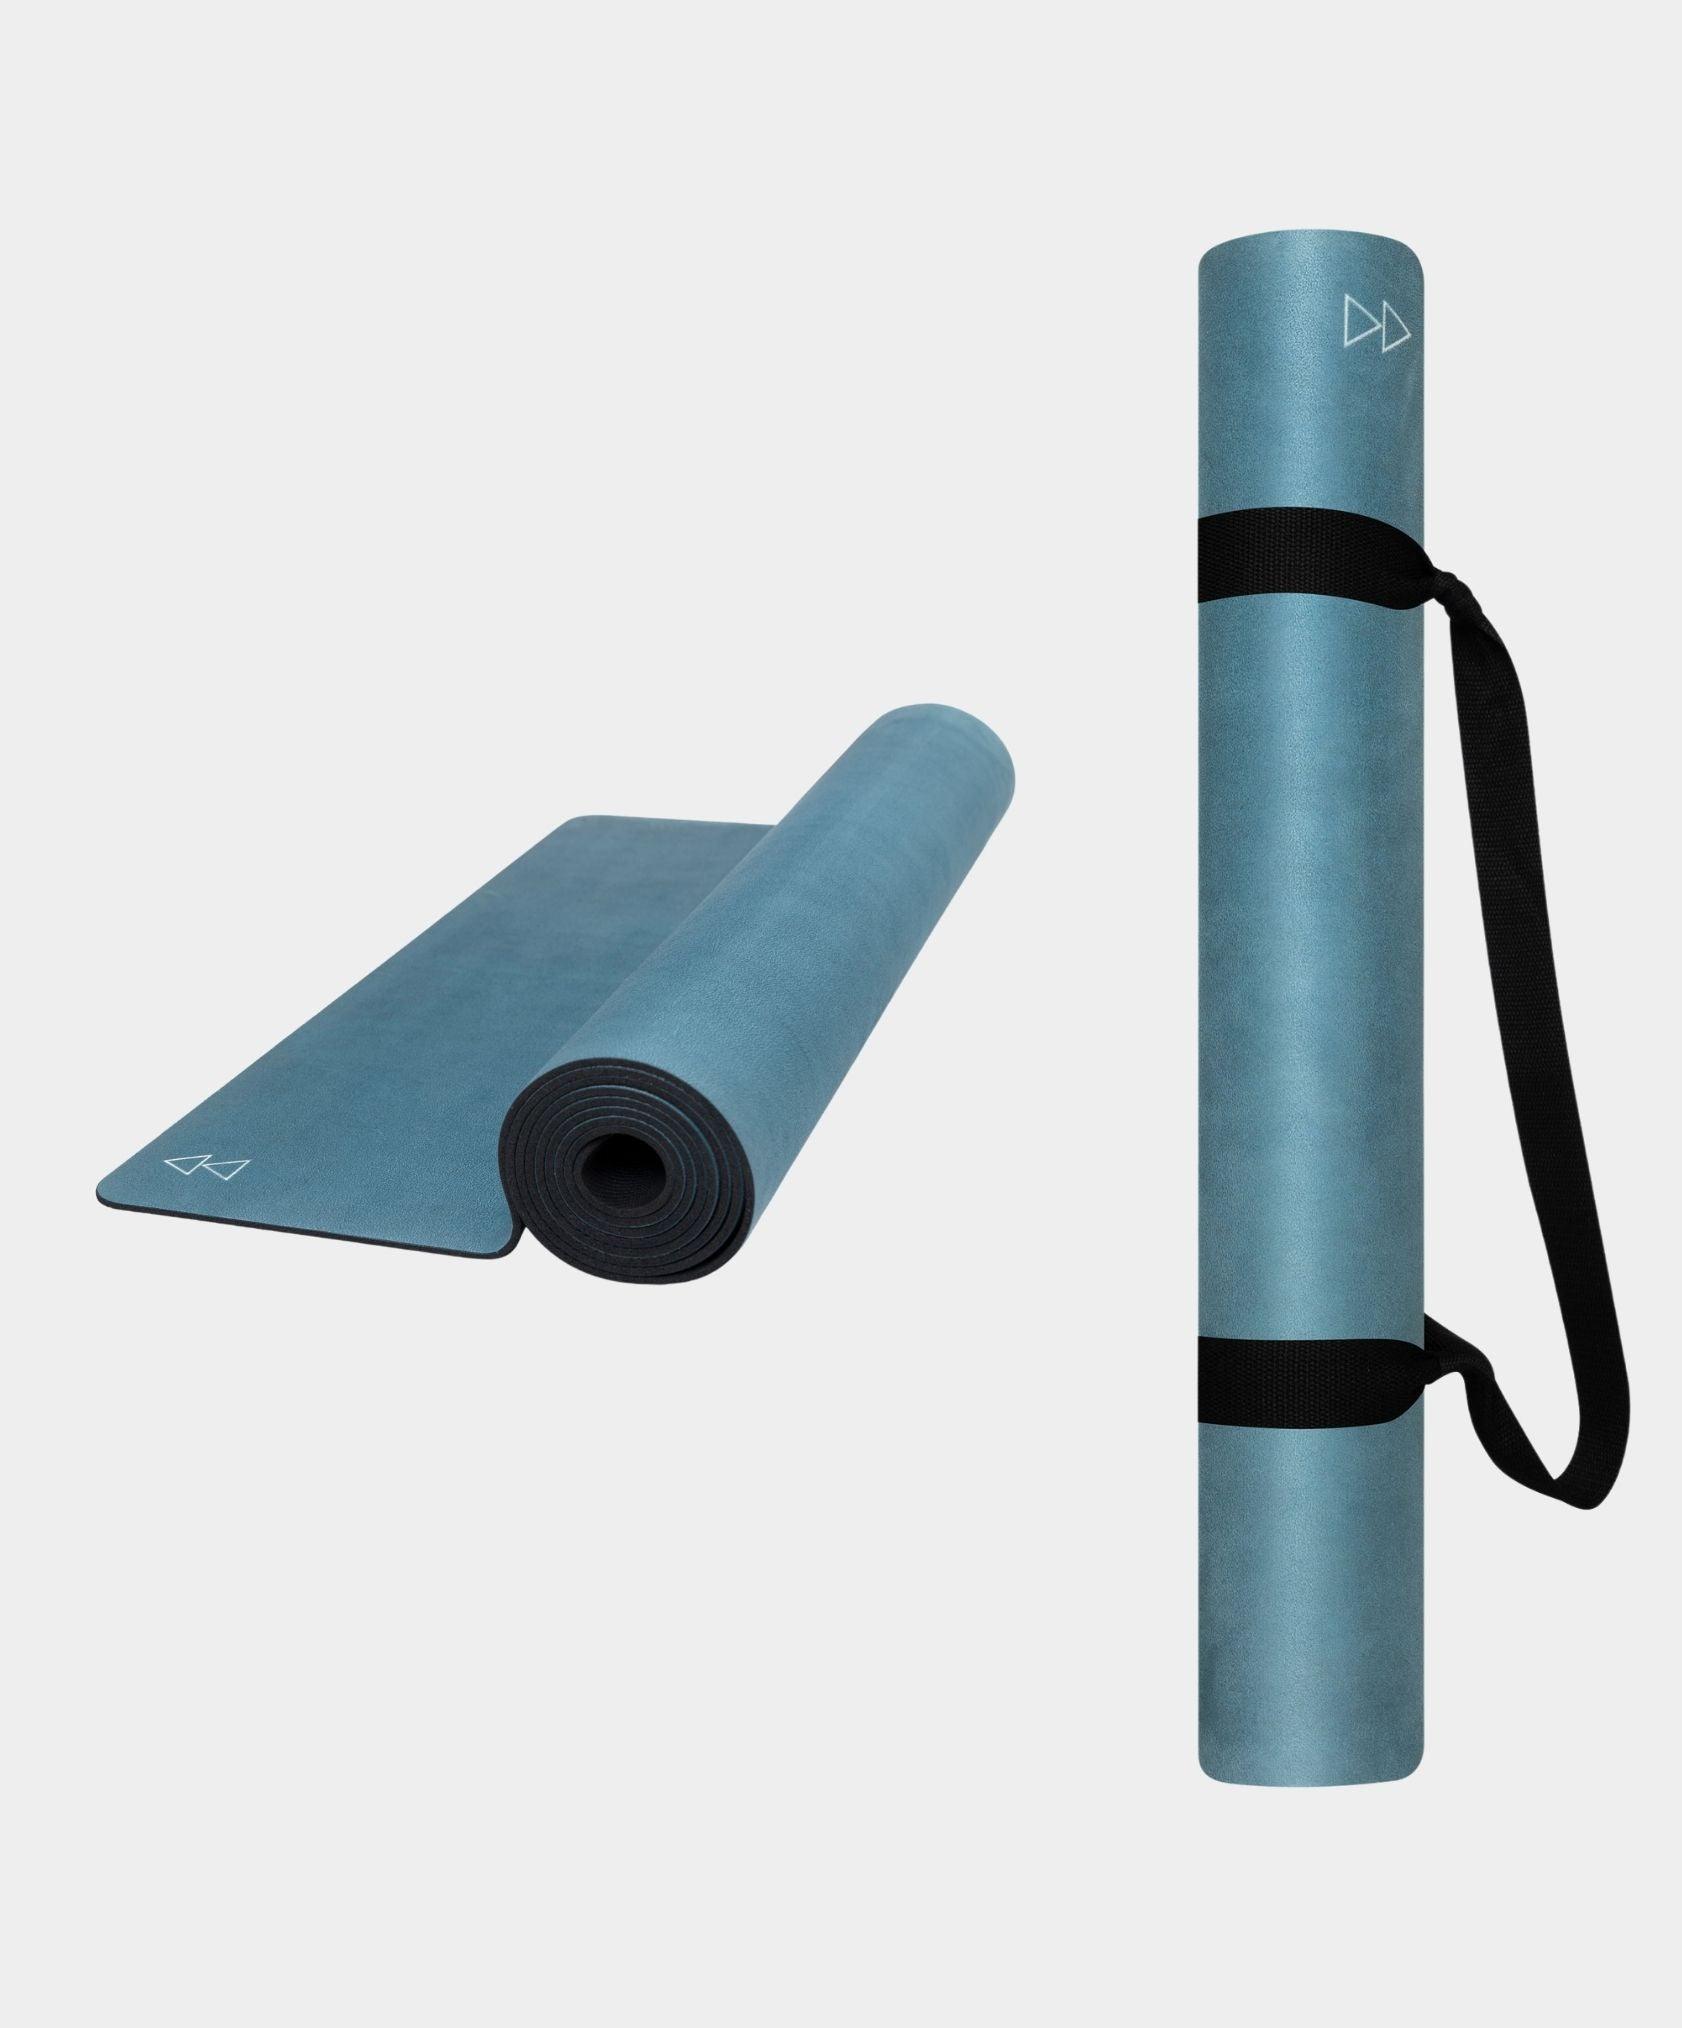 YDL Combo Yoga Mat - 2-in-1 (Mat + Towel) - Best For Hot Practices - Yoga Design Lab 